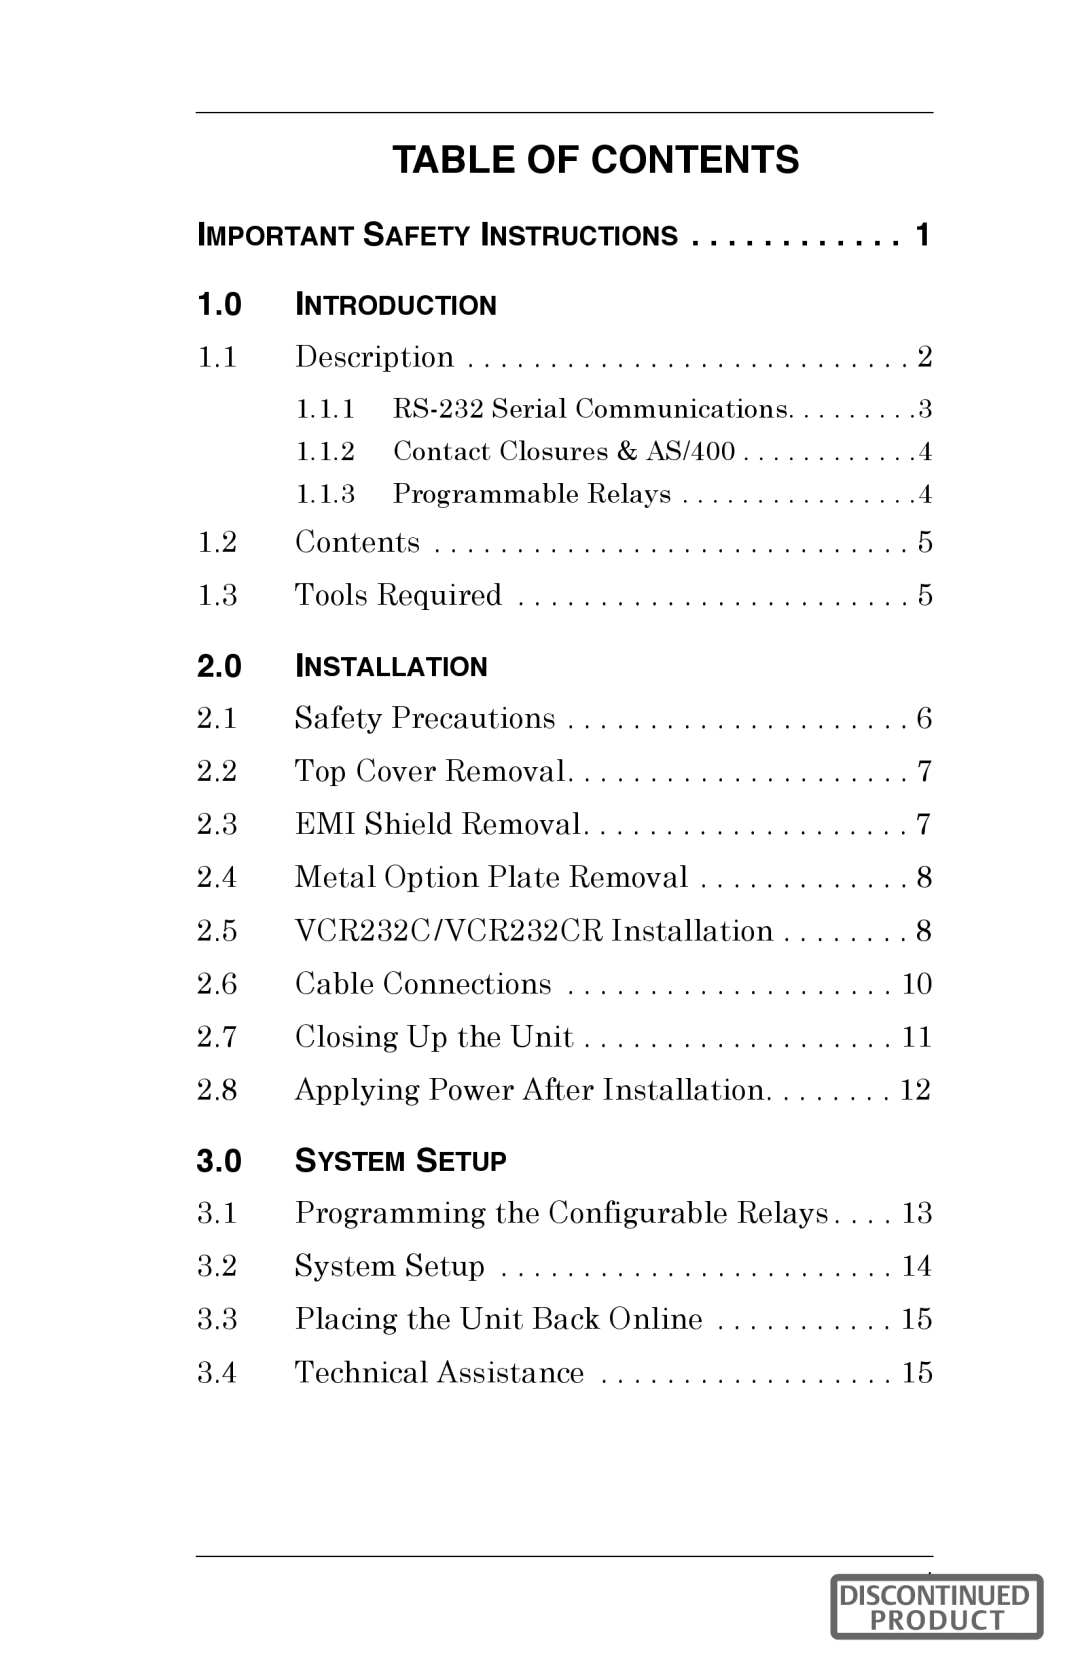 Liebert VCR232CR instruction manual Table Of Contents, Important Safety Instructions 